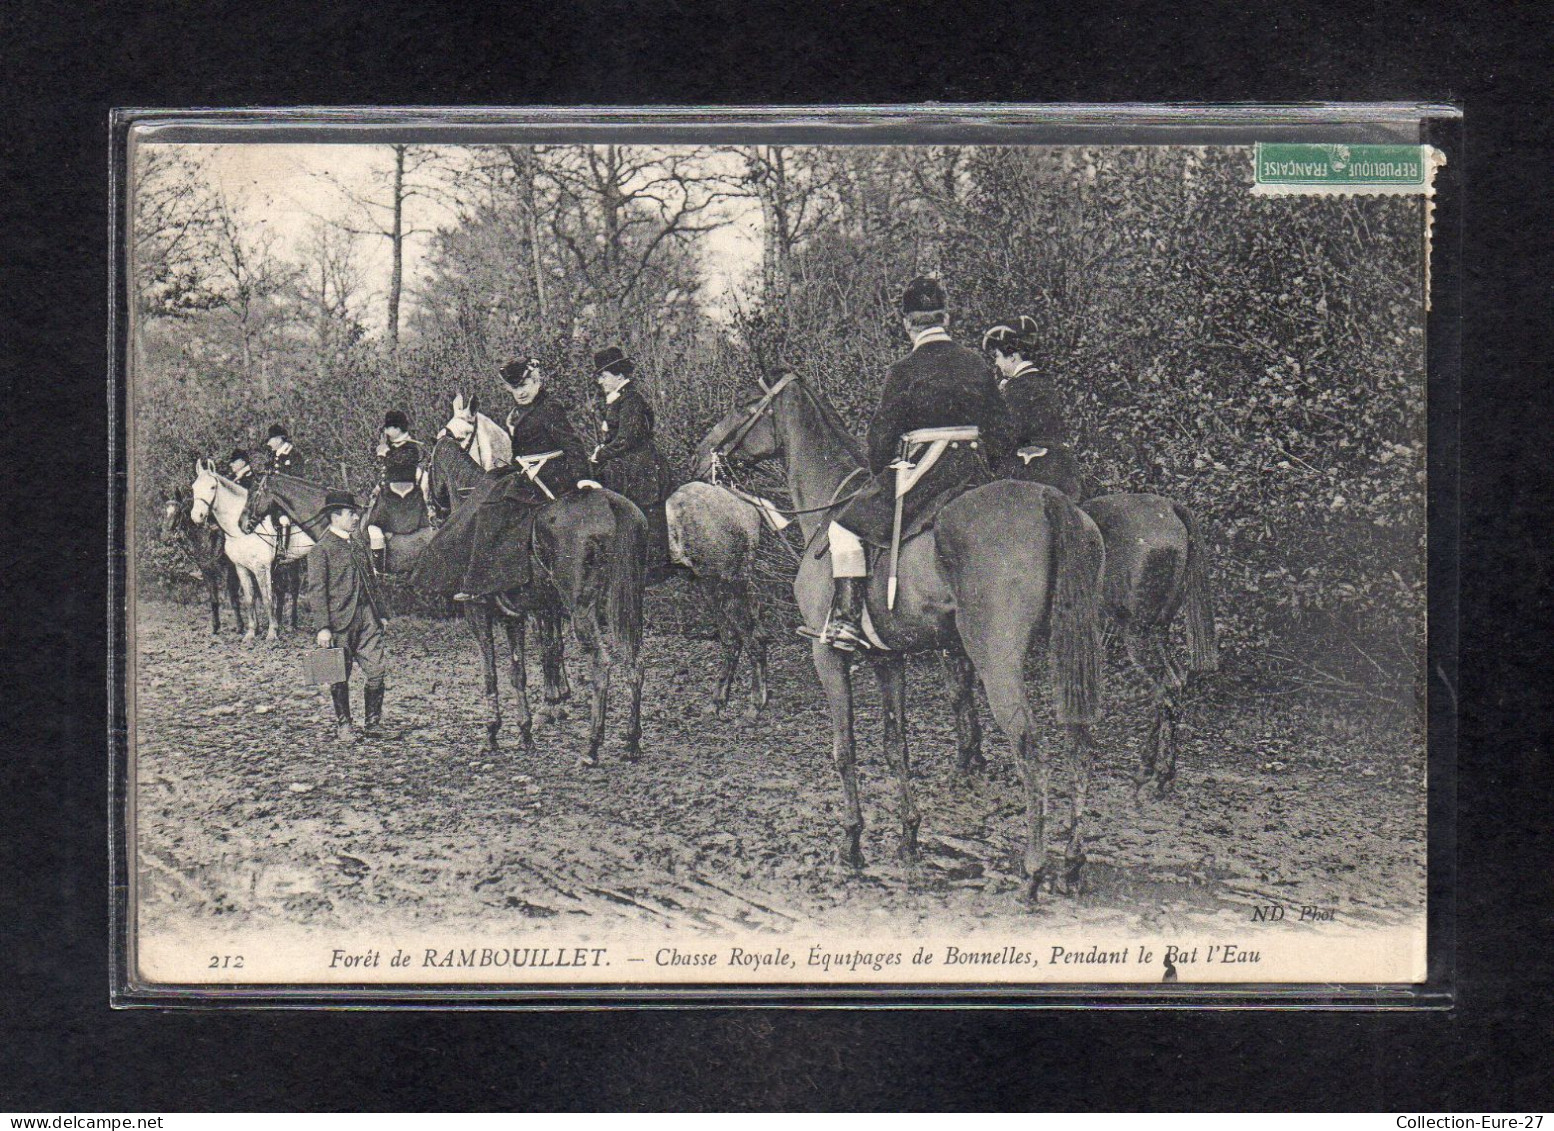 (06/05/24) 78-CPA RAMBOUILLET - CHASSE A COURRE - Rambouillet